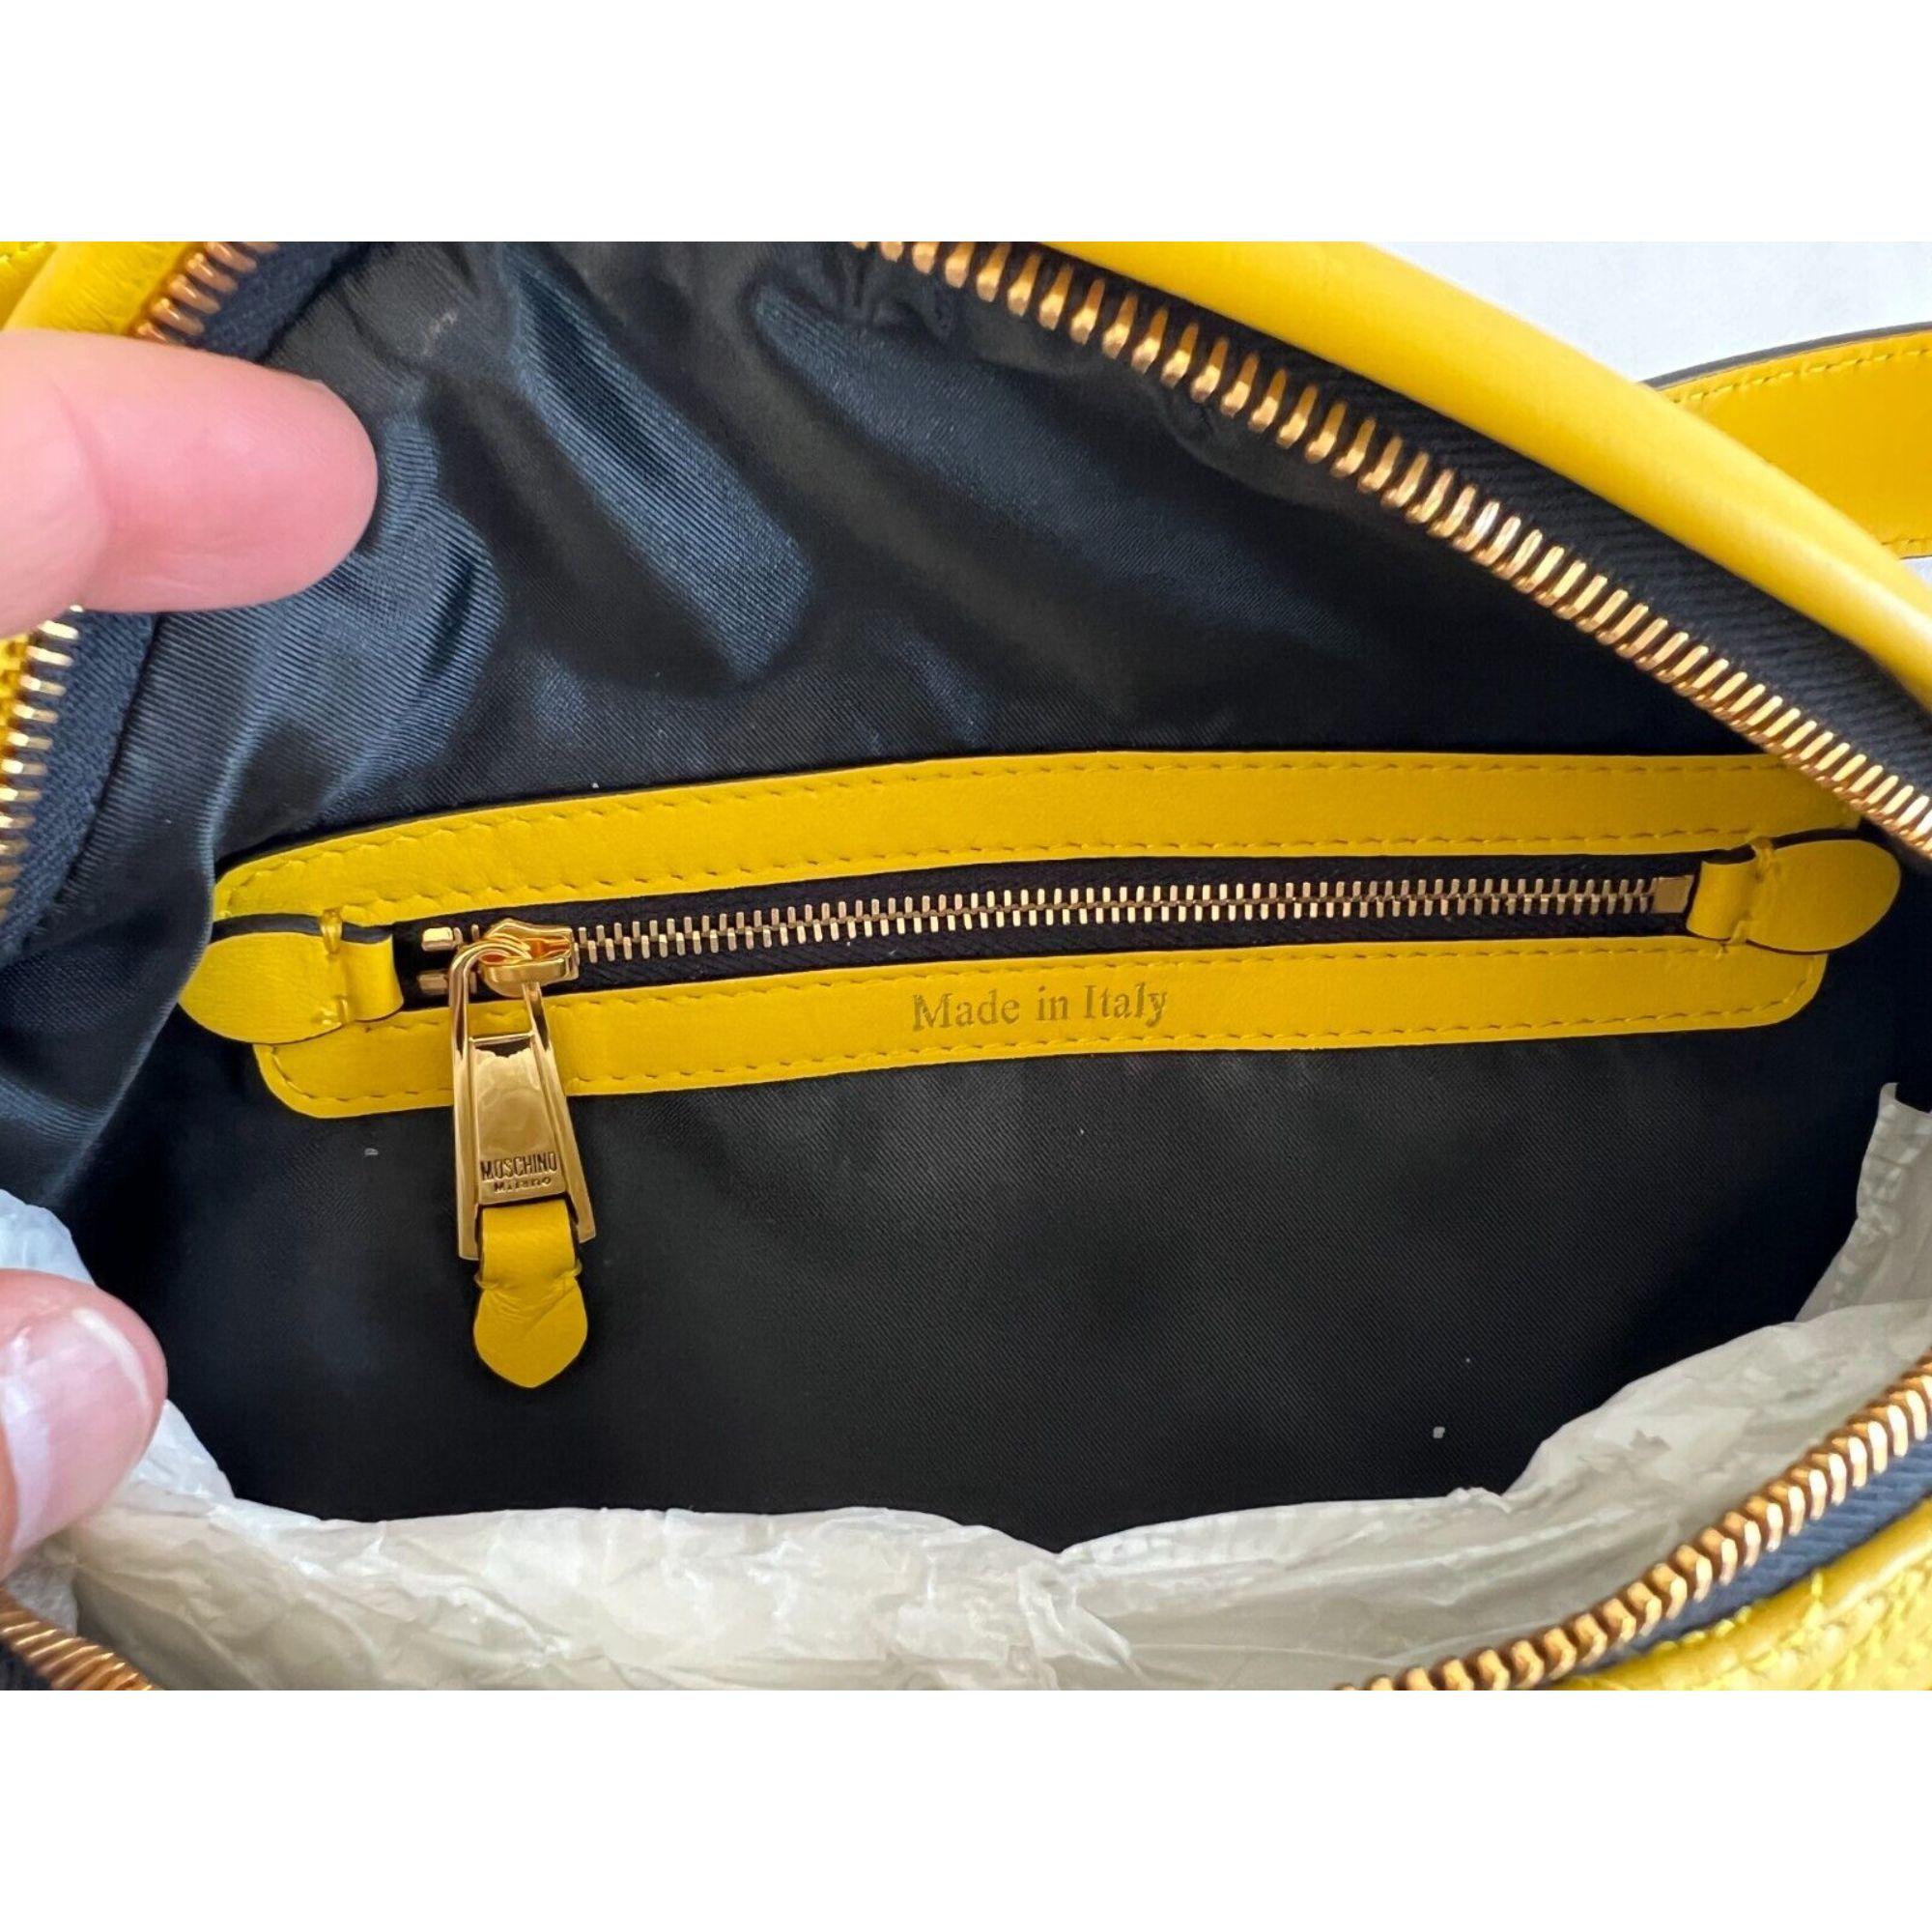 SS21 Moschino Couture Yellow Fanny Pack with Engraved Smiley by Jeremy Scott For Sale 12